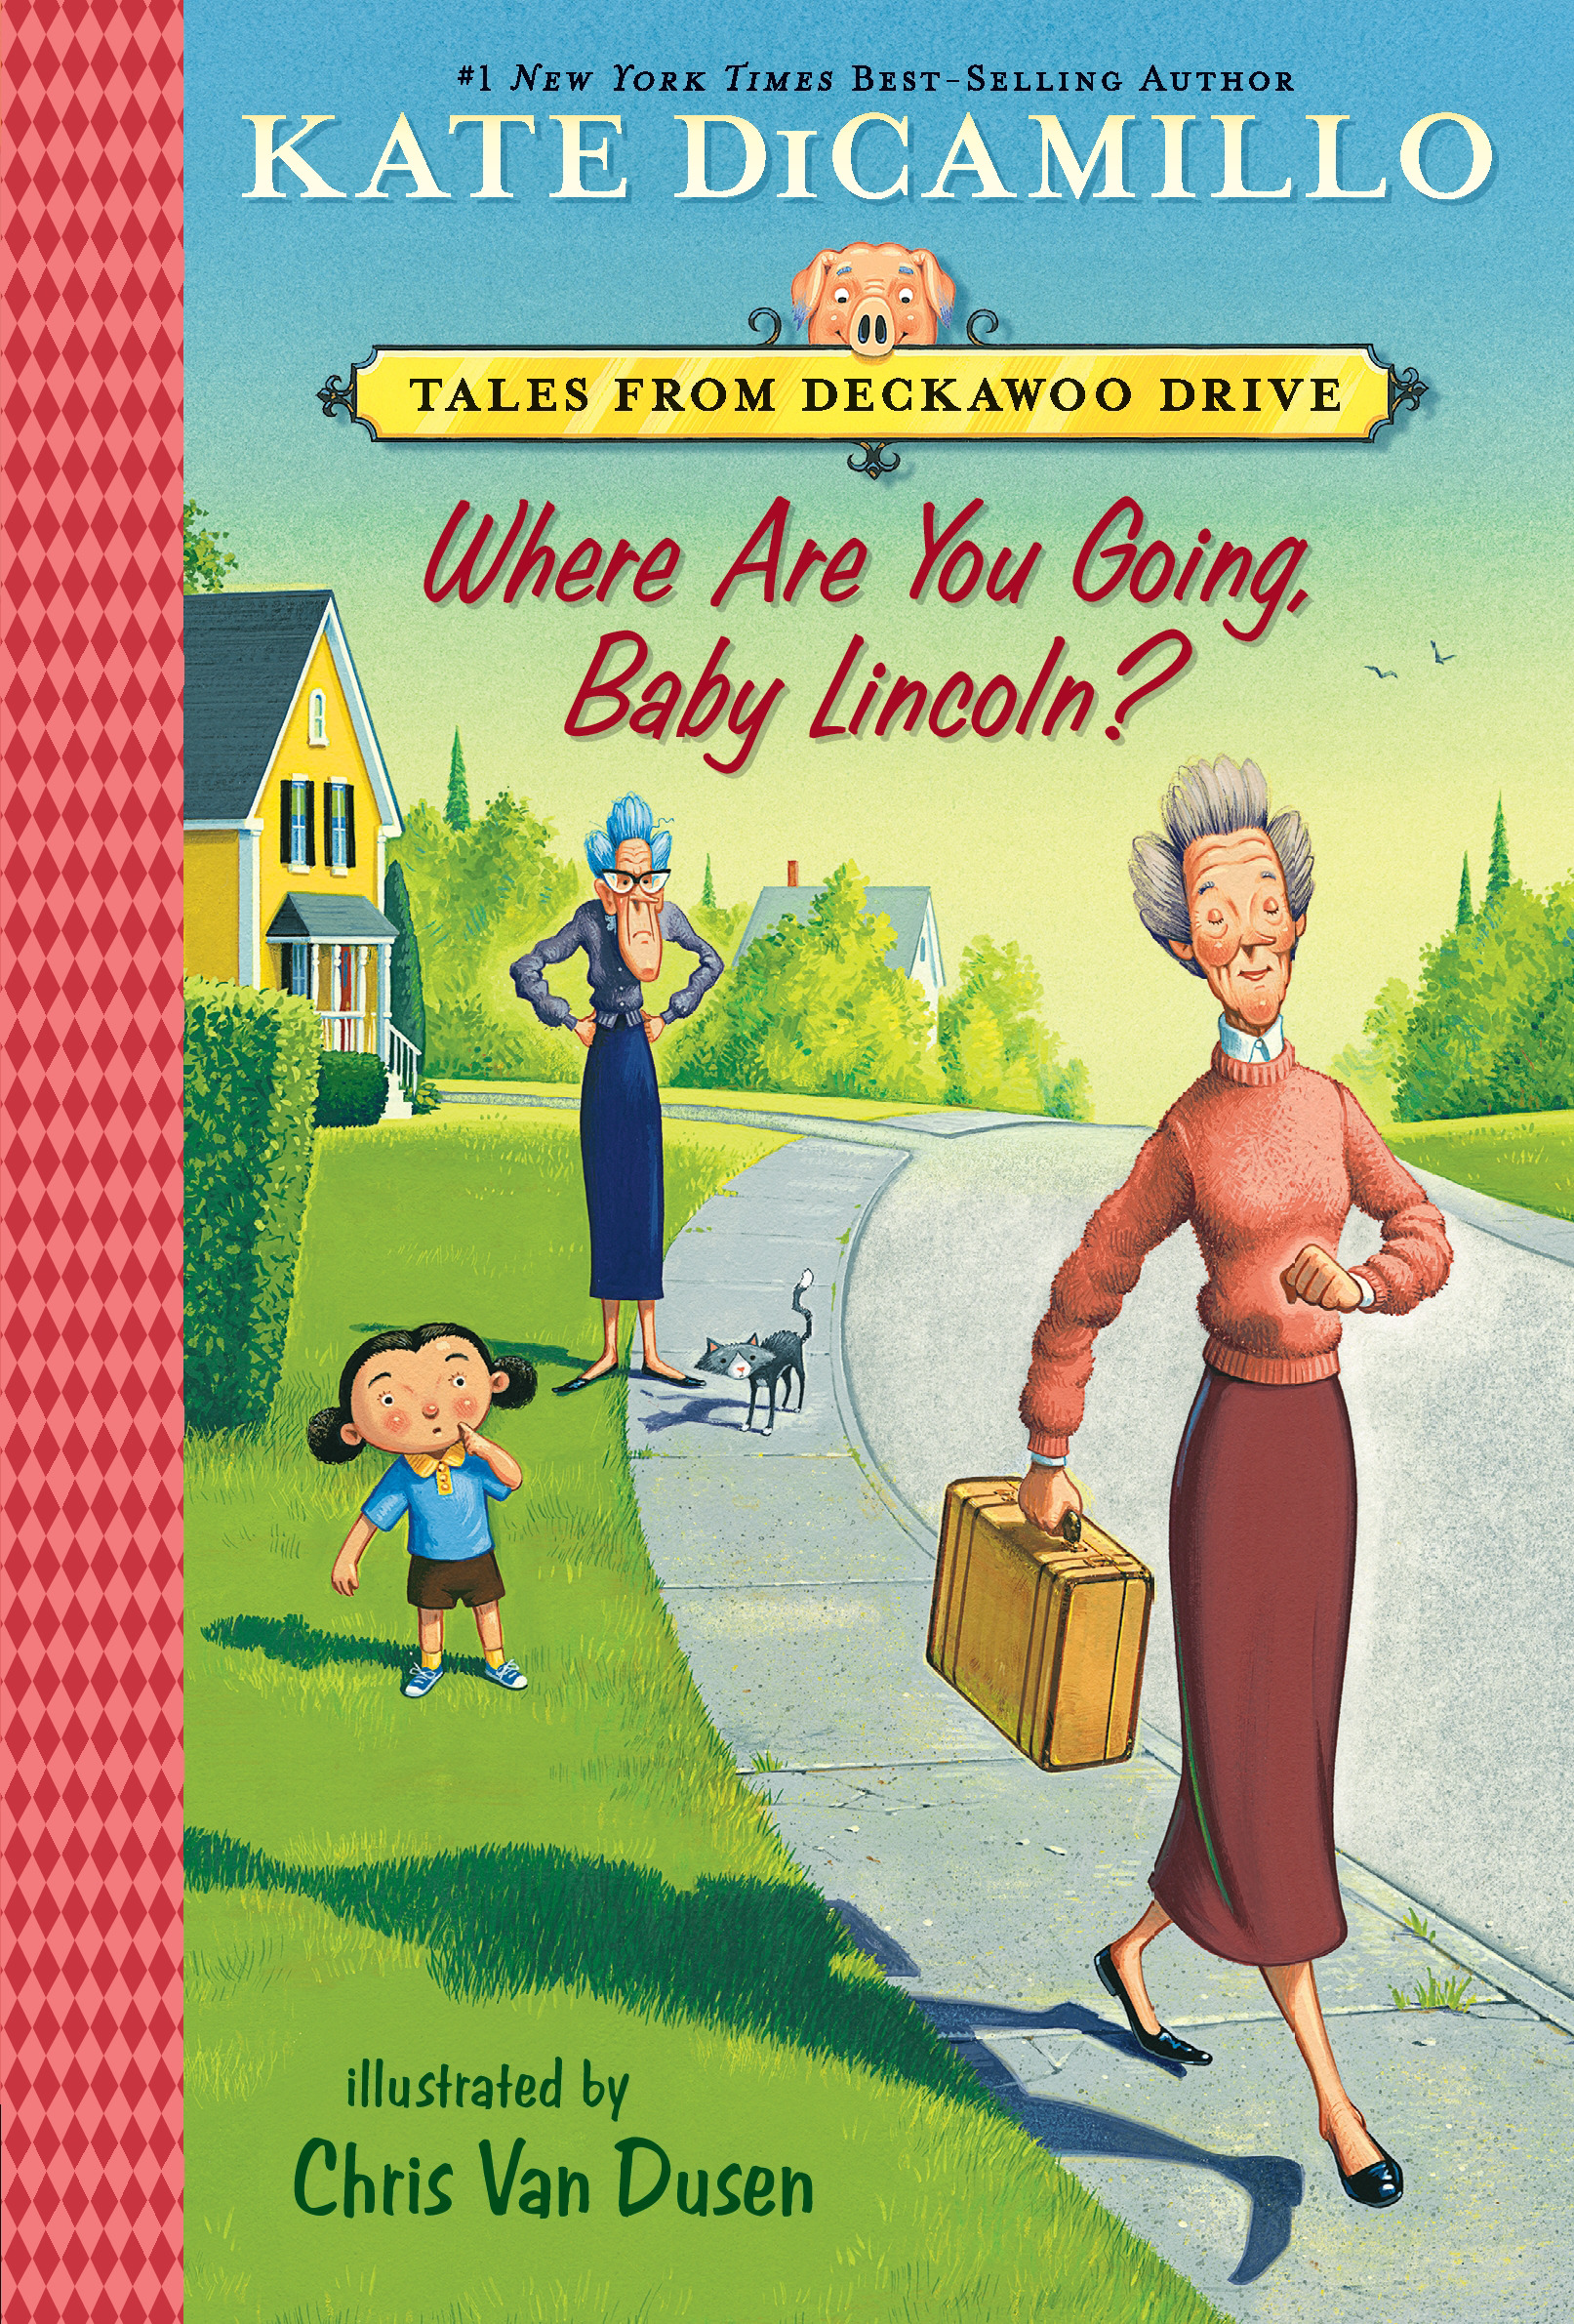 Tales from Deckawoo Drive T.03 - Where Are You Going, Baby Lincoln?  | DiCamillo, Kate